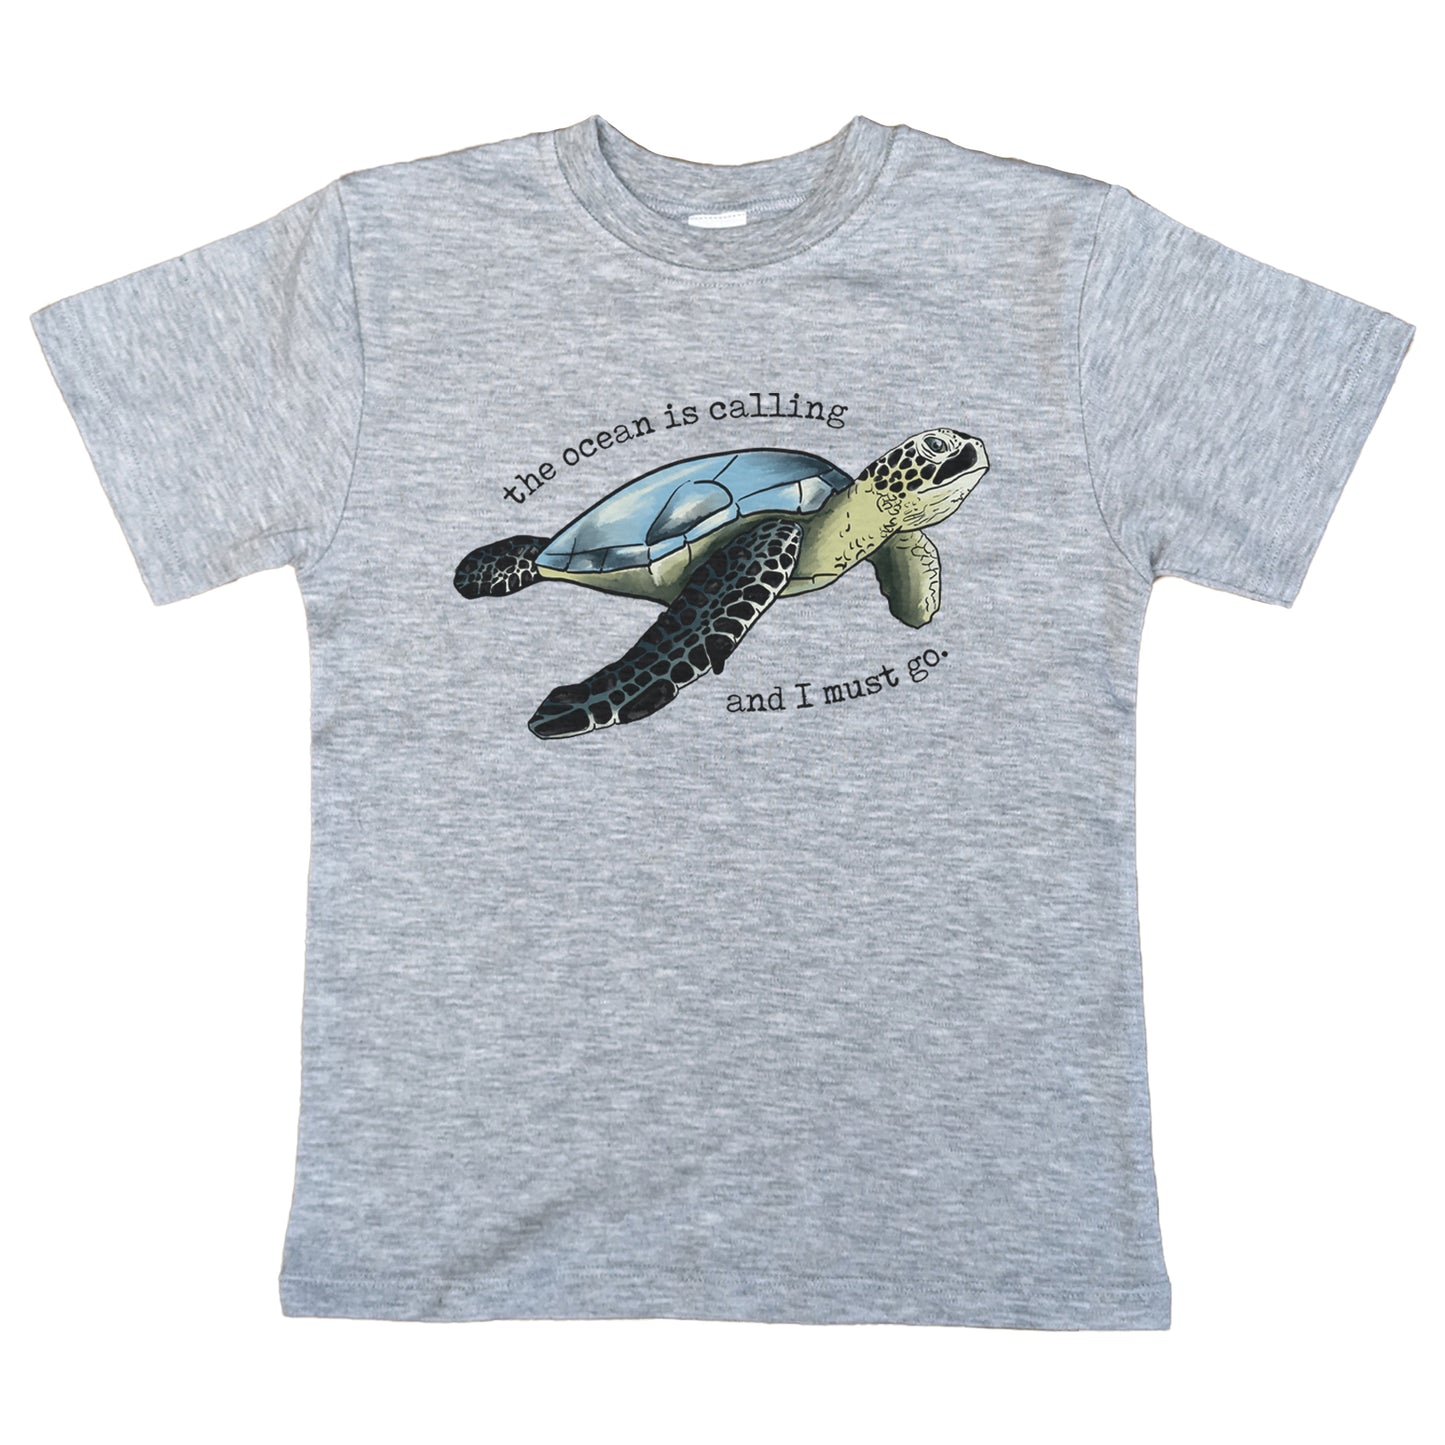 "The Ocean is Calling and I must Go" Grey Sea Turtle Tee